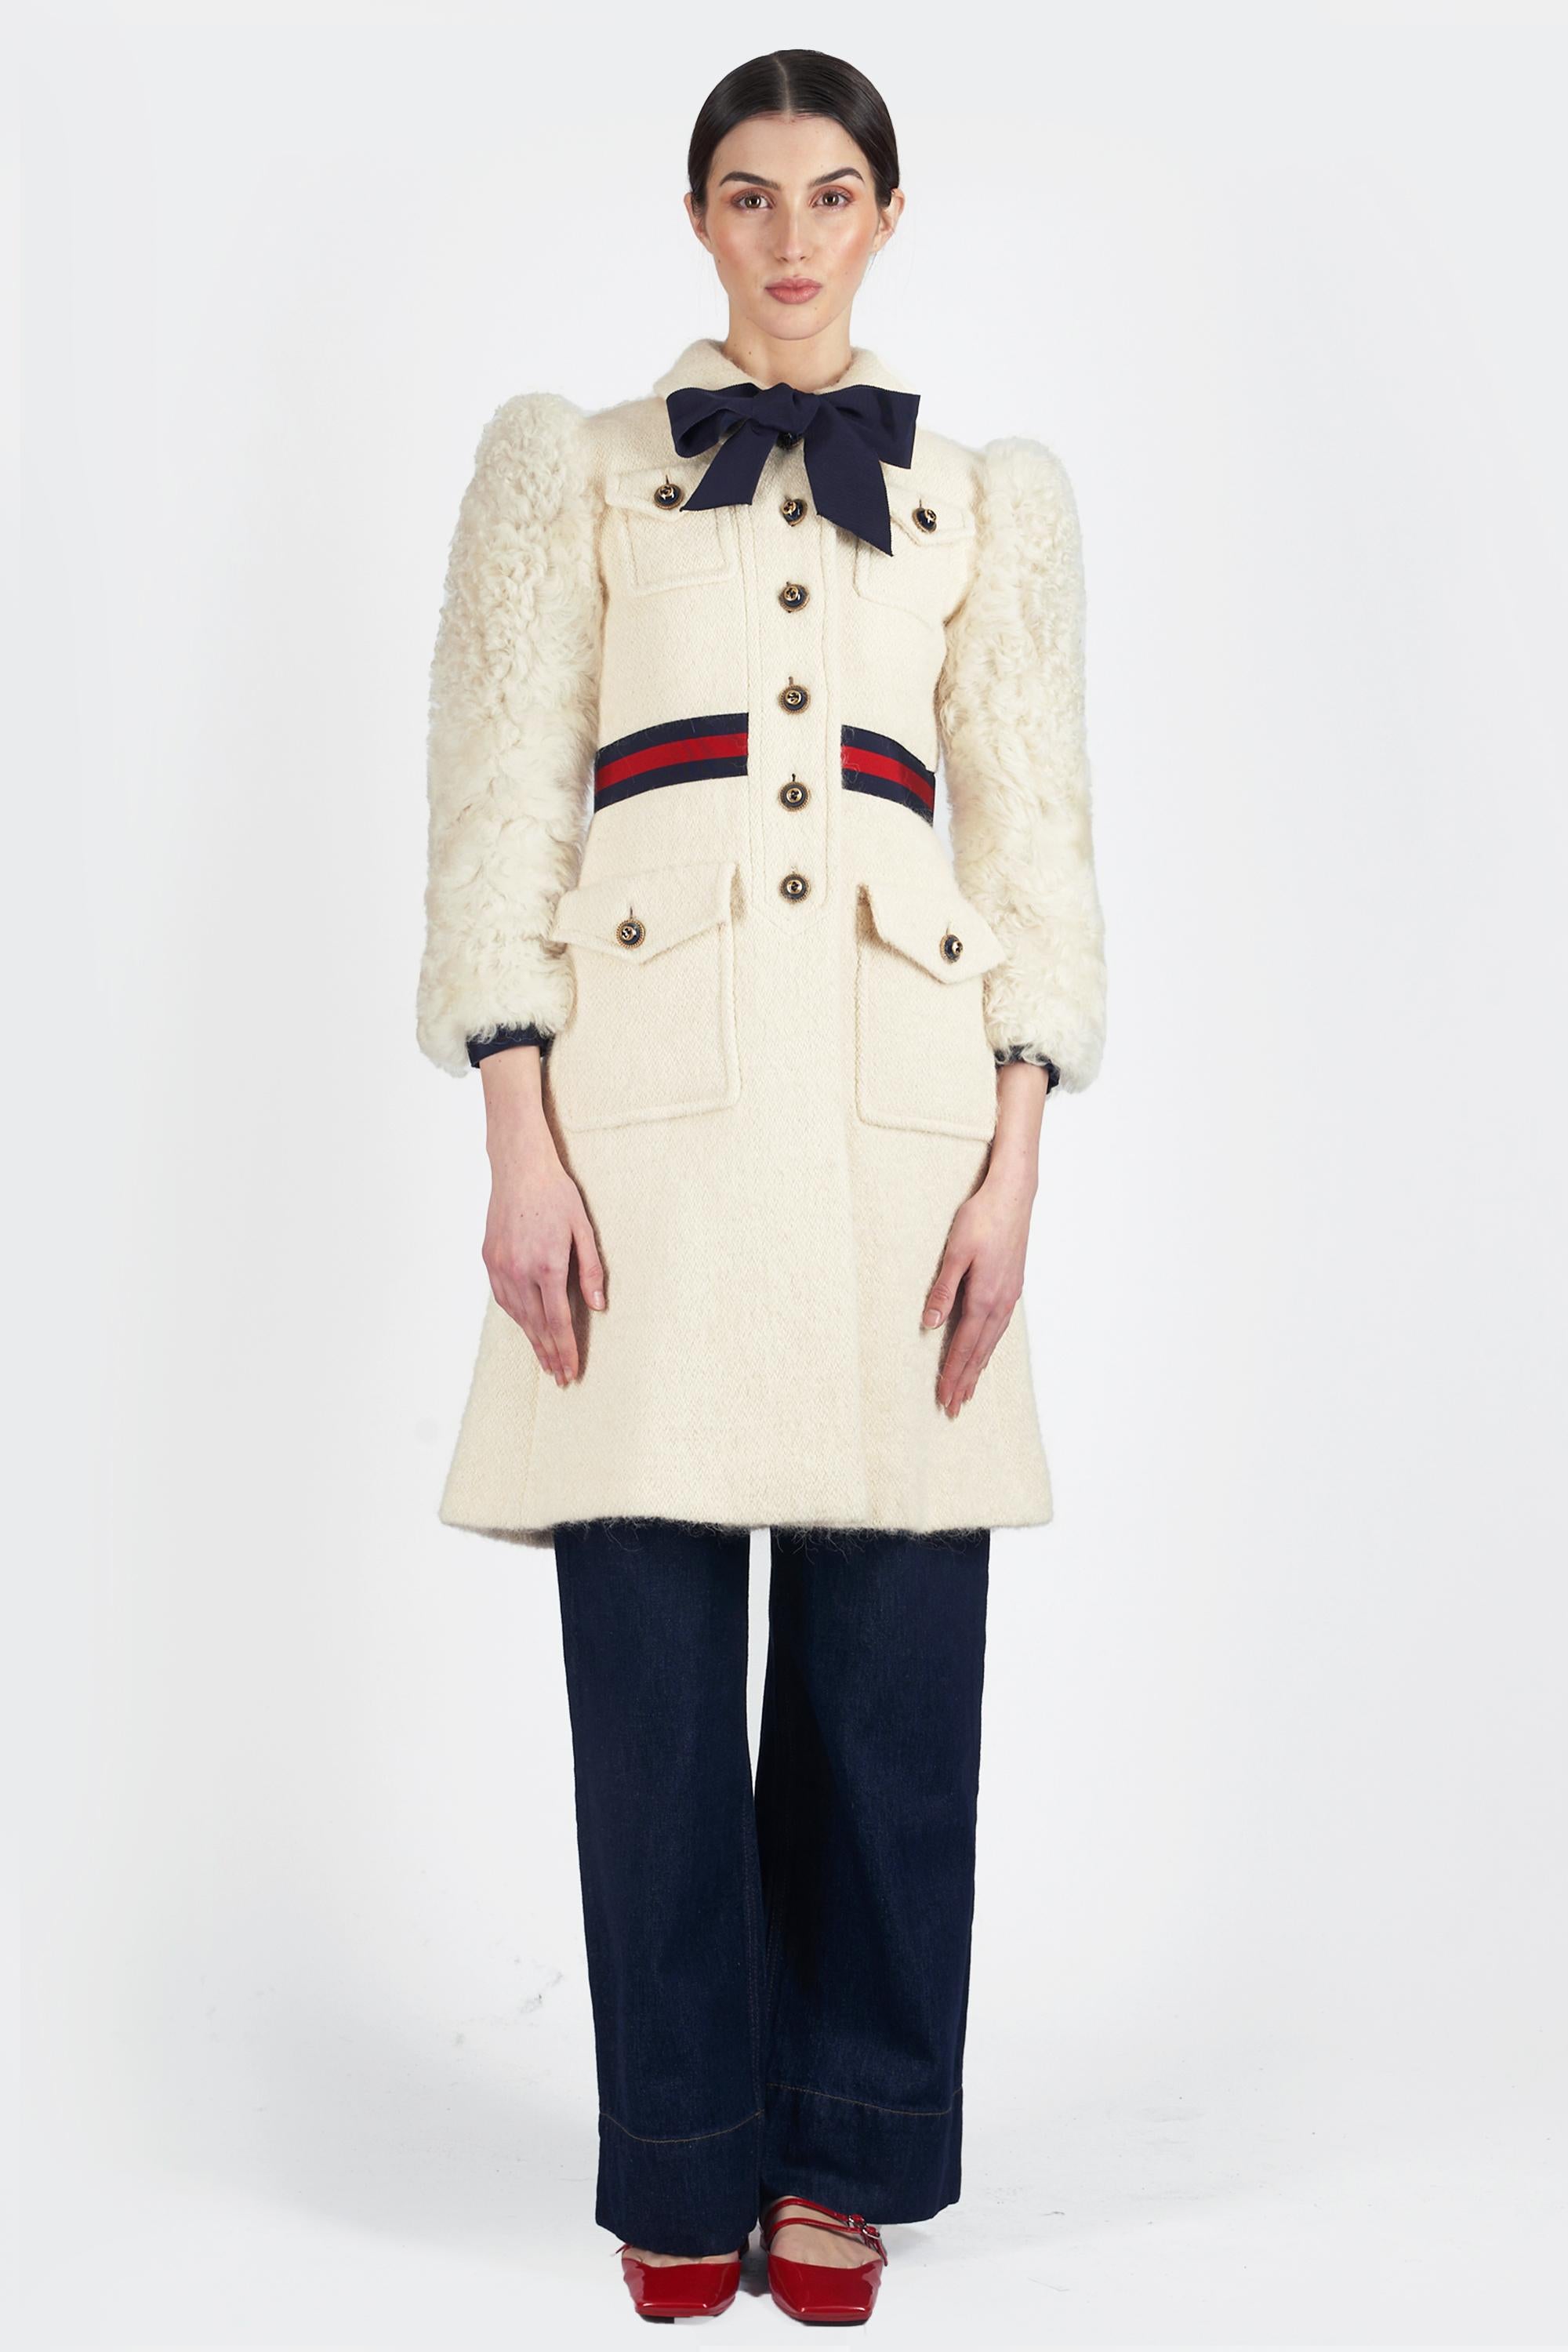 Gucci F/W 2021 Shearling and Wool Coat In Excellent Condition For Sale In London, GB